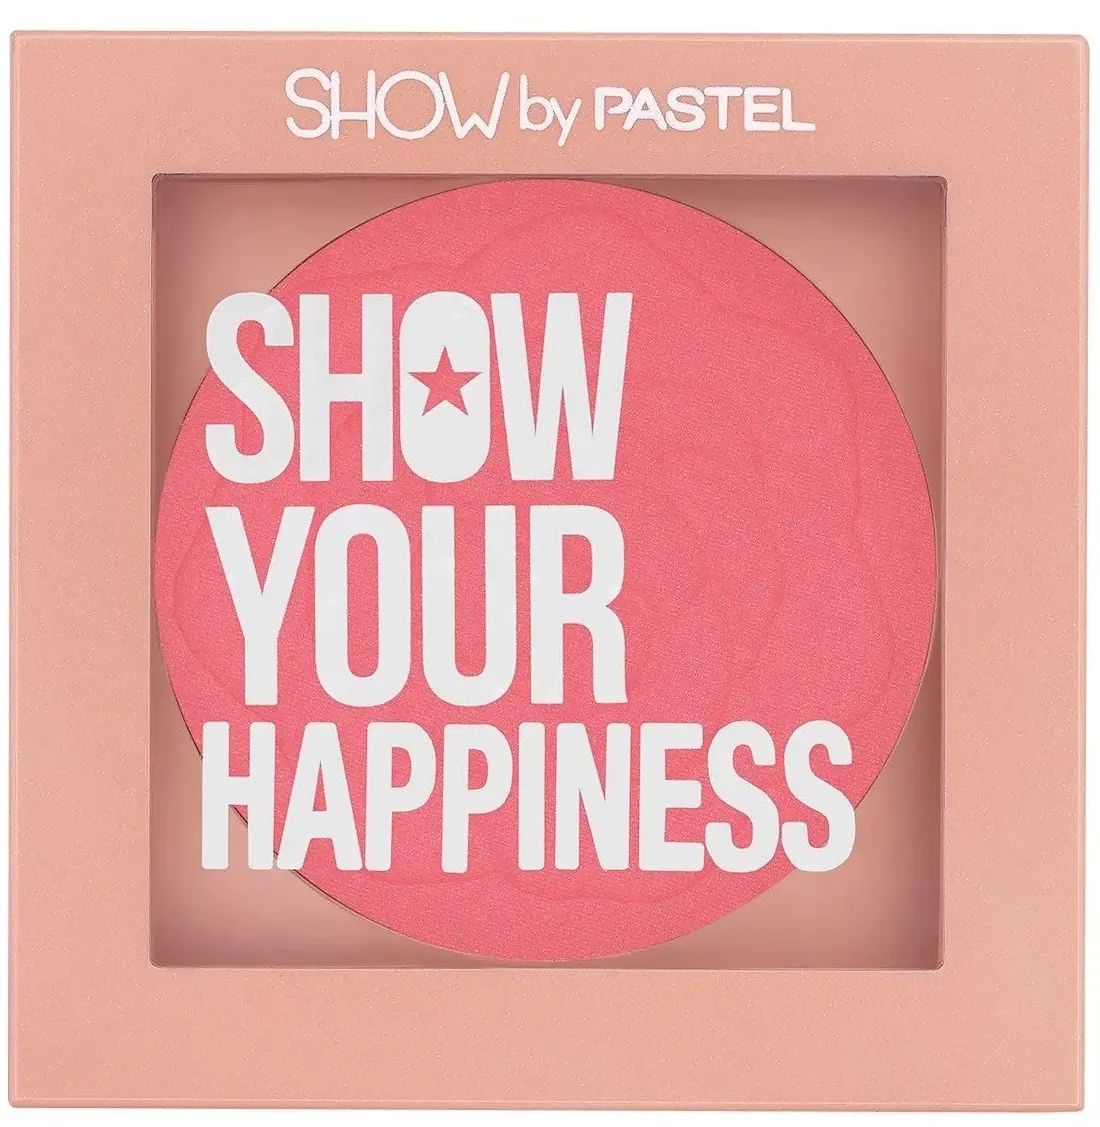 Румяна для лица Pastel Show Your Happiness Blush, 202 Colorful, 4,2 г oud for happiness